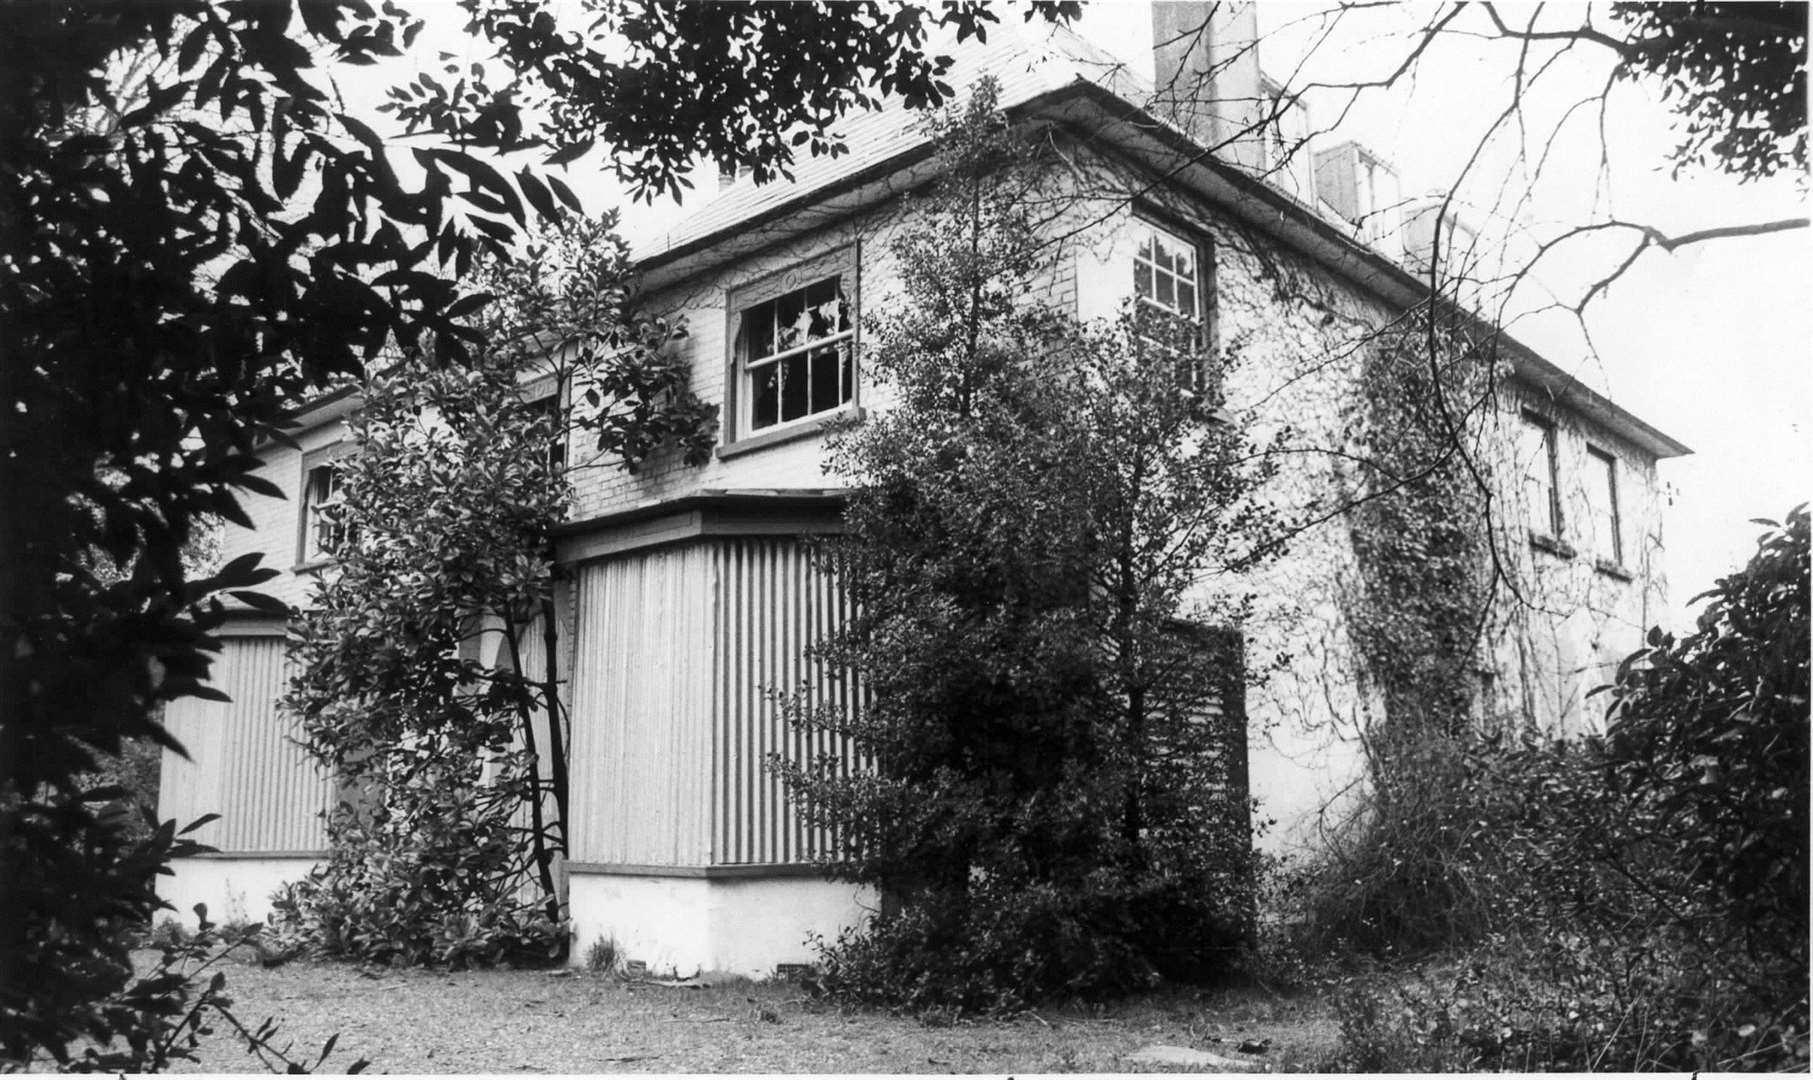 In this picture from 1980, Macklands House in Lower Rainham, which once belonged to Sir John Hawkins